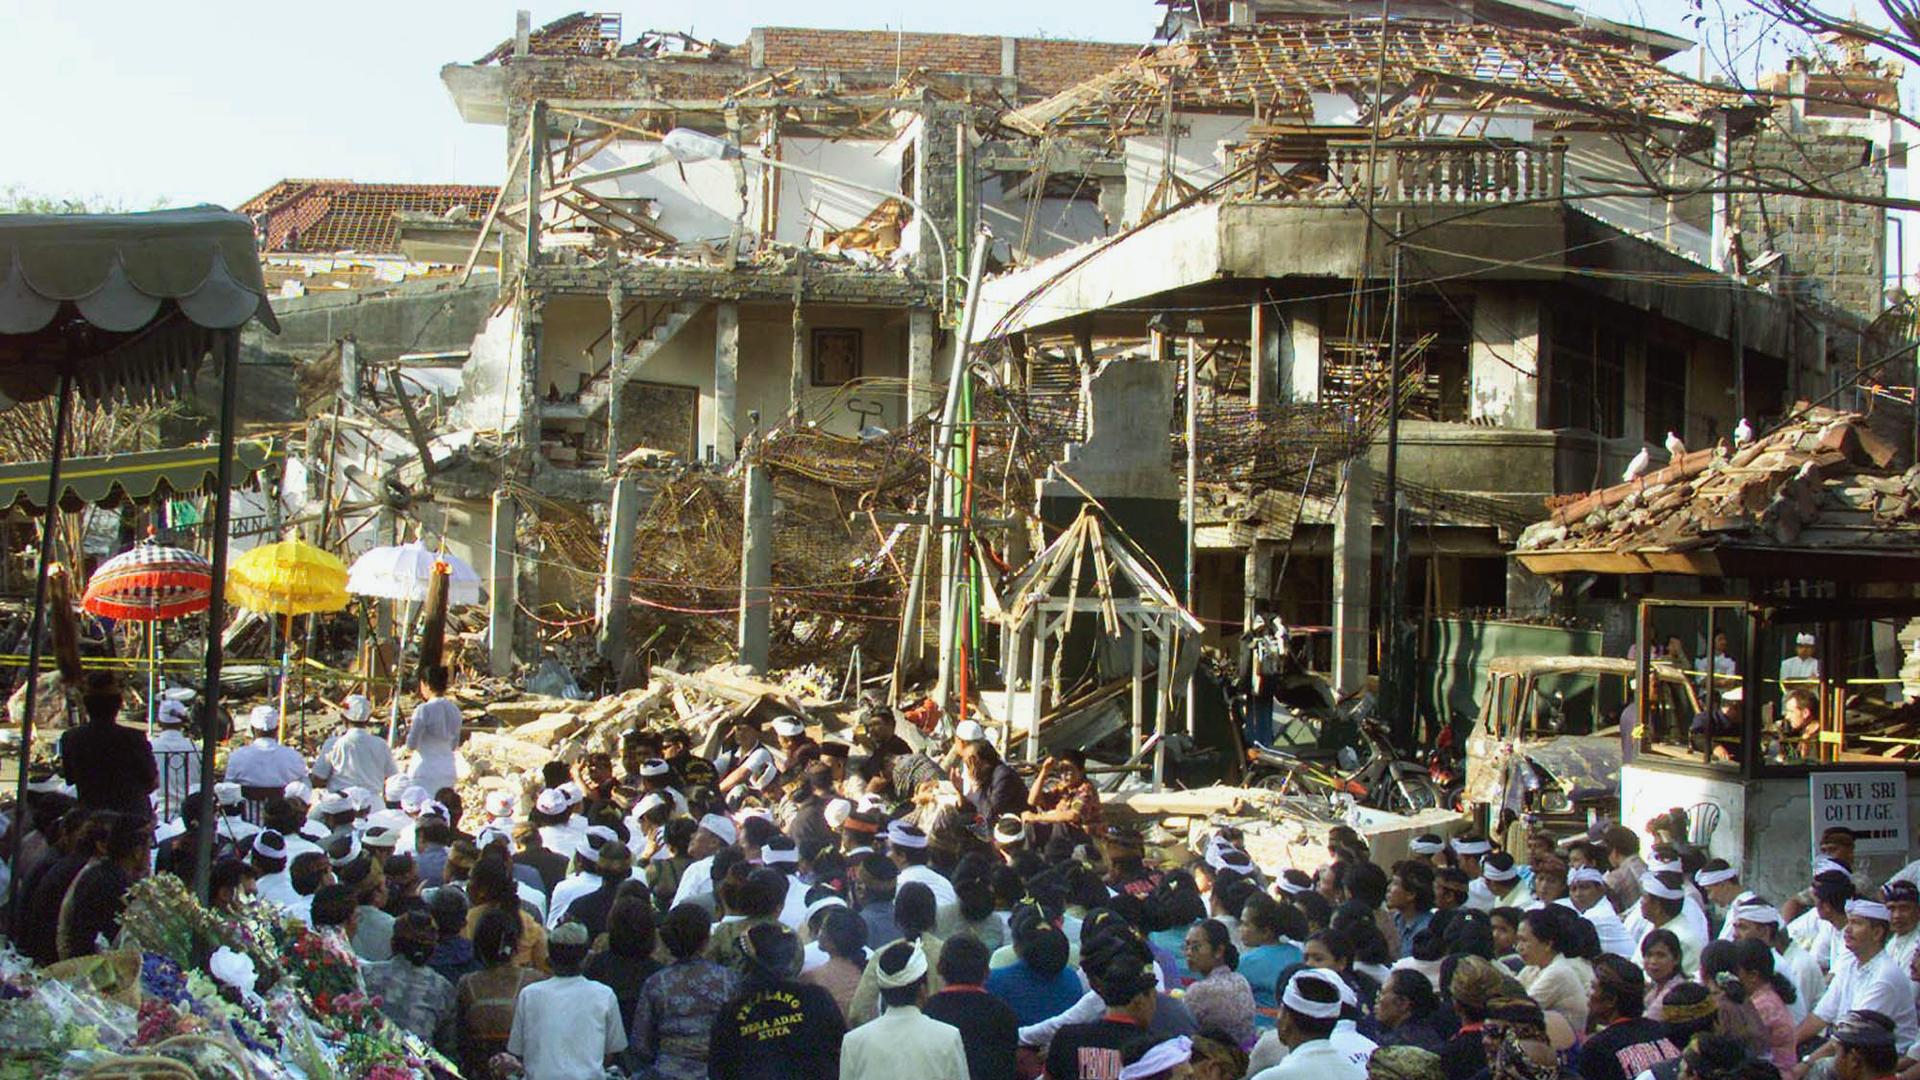 Local Balinese offer prayers for the victims at the site of the bomb blast in Kuta, Bali, Oct. 18, 2002. Nearly 200 people were killed and more than 300 were injured in the nightclub bombing. 